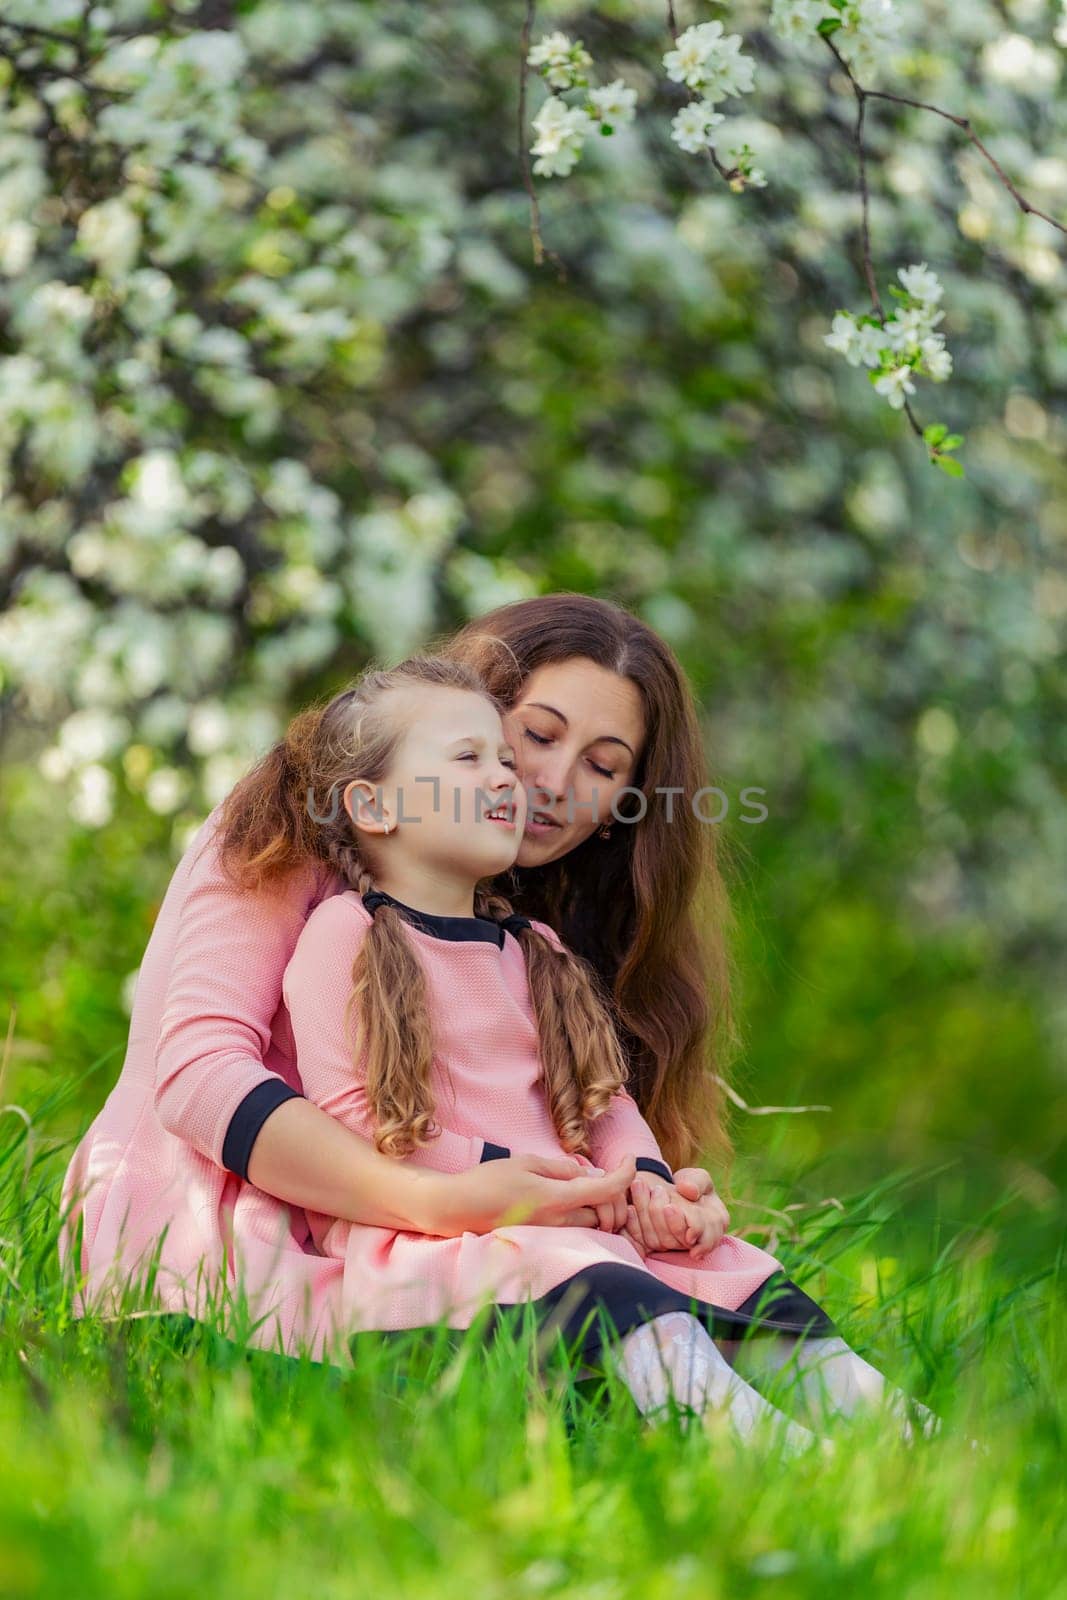 mother and daughter walk through a blooming garden by zokov